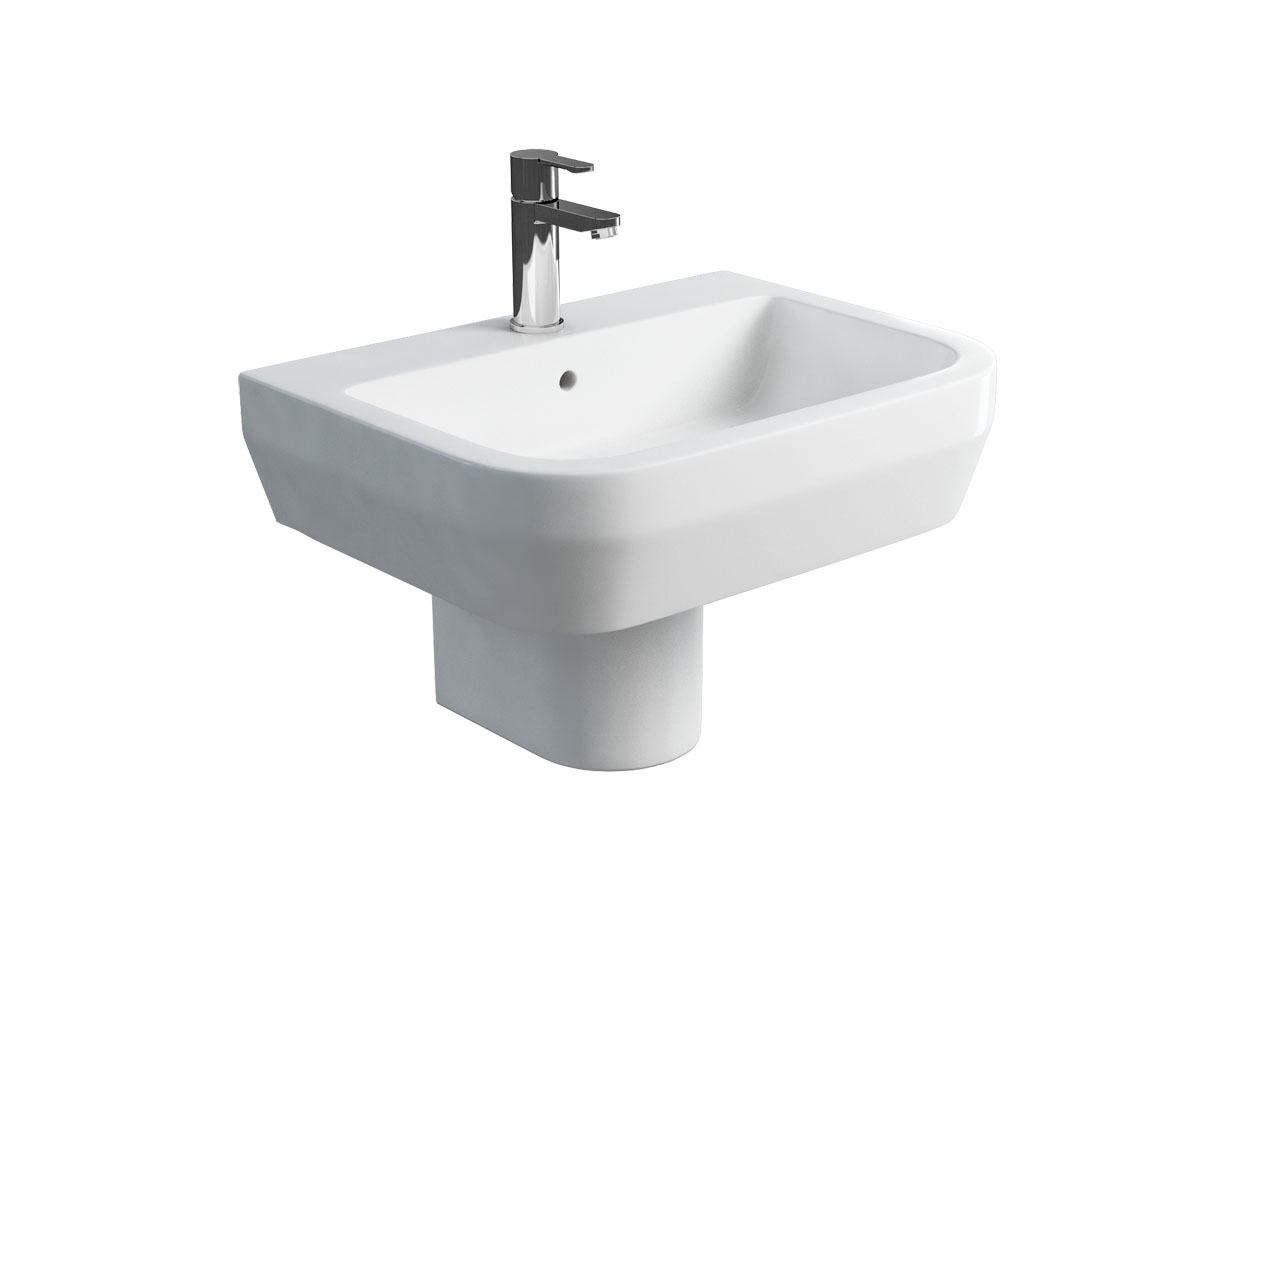 Curve S30 600 basin and round fronted semi pedestal